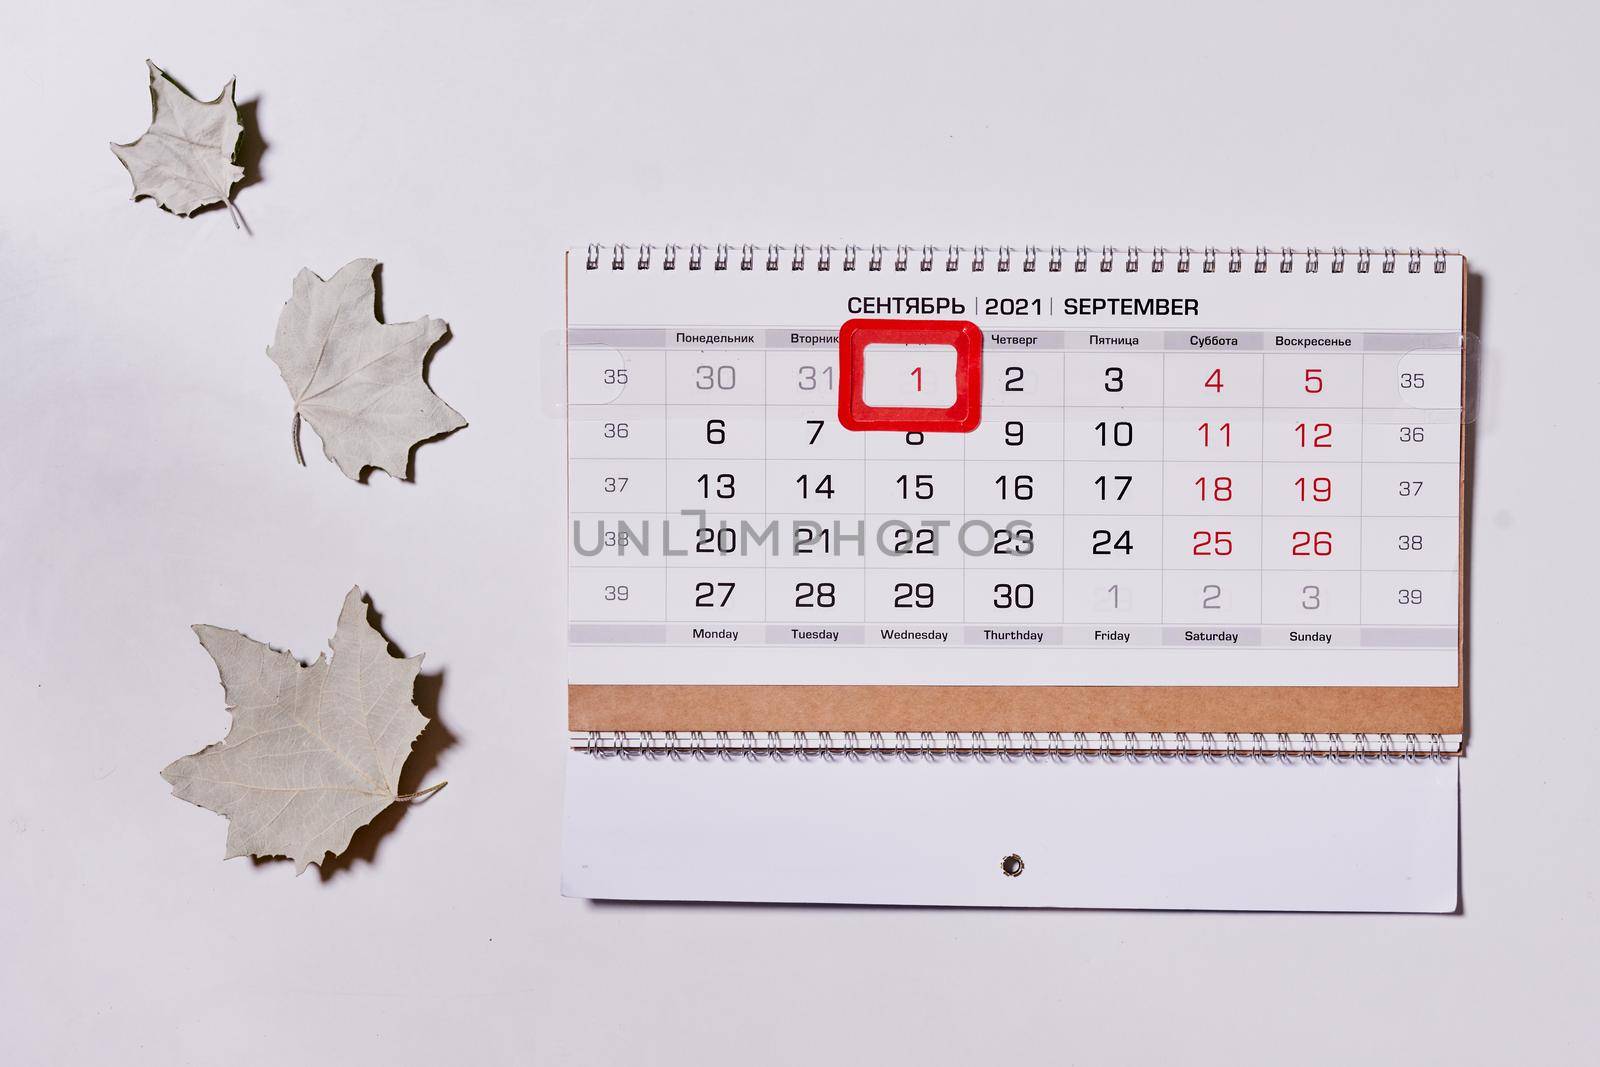 September 2021 monthly calendar and fall leaves on white background. Top view. Overhead view of Autumn month - September calendar